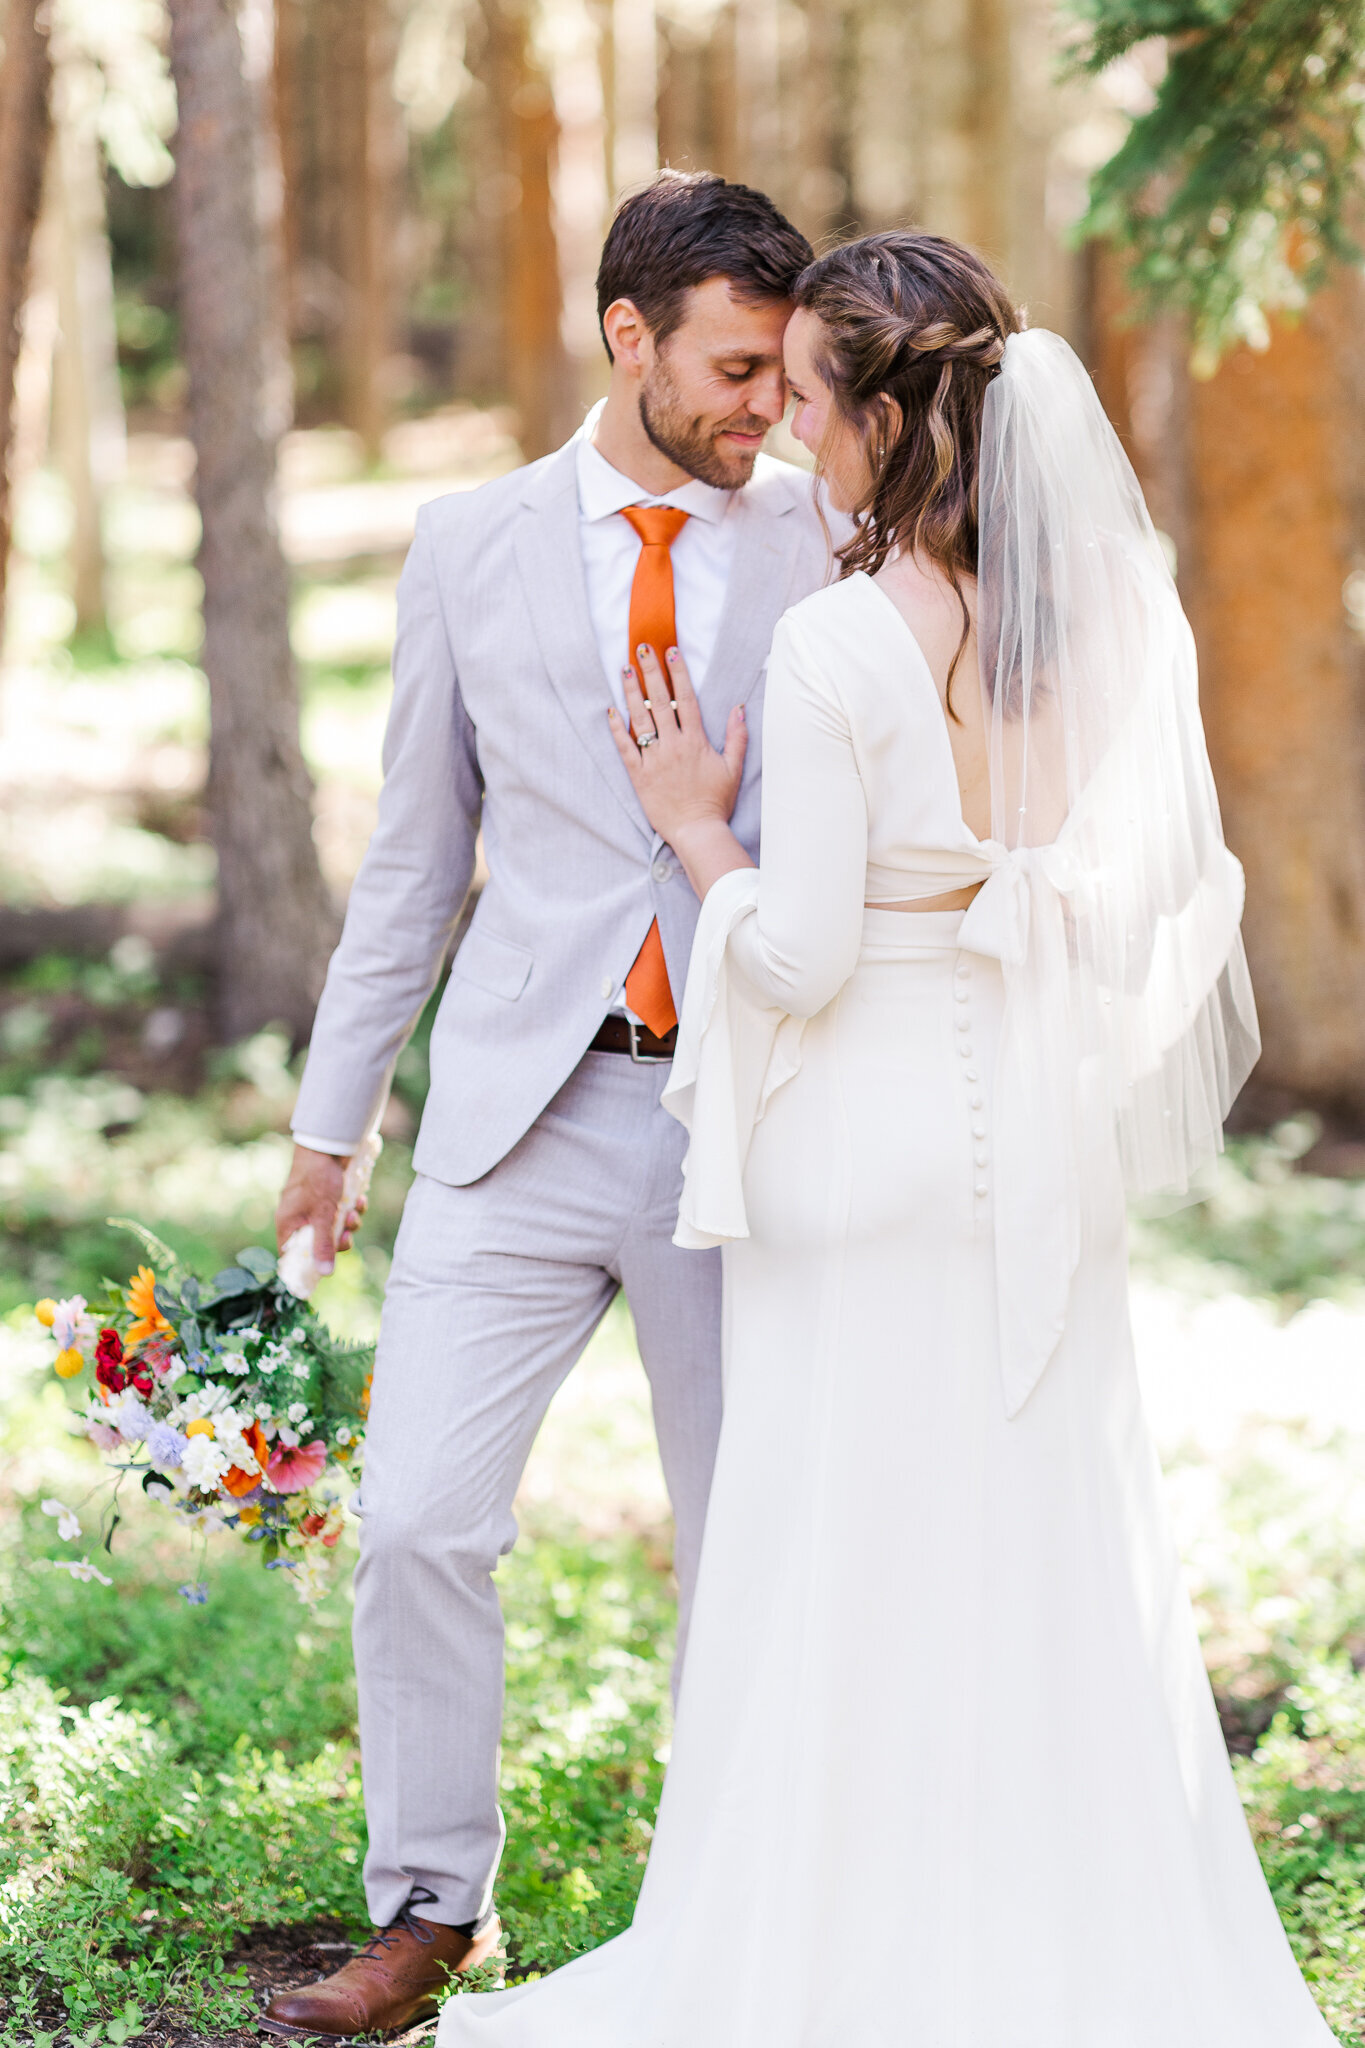 Bride and Groom at Crested Butte Colorado Wedding